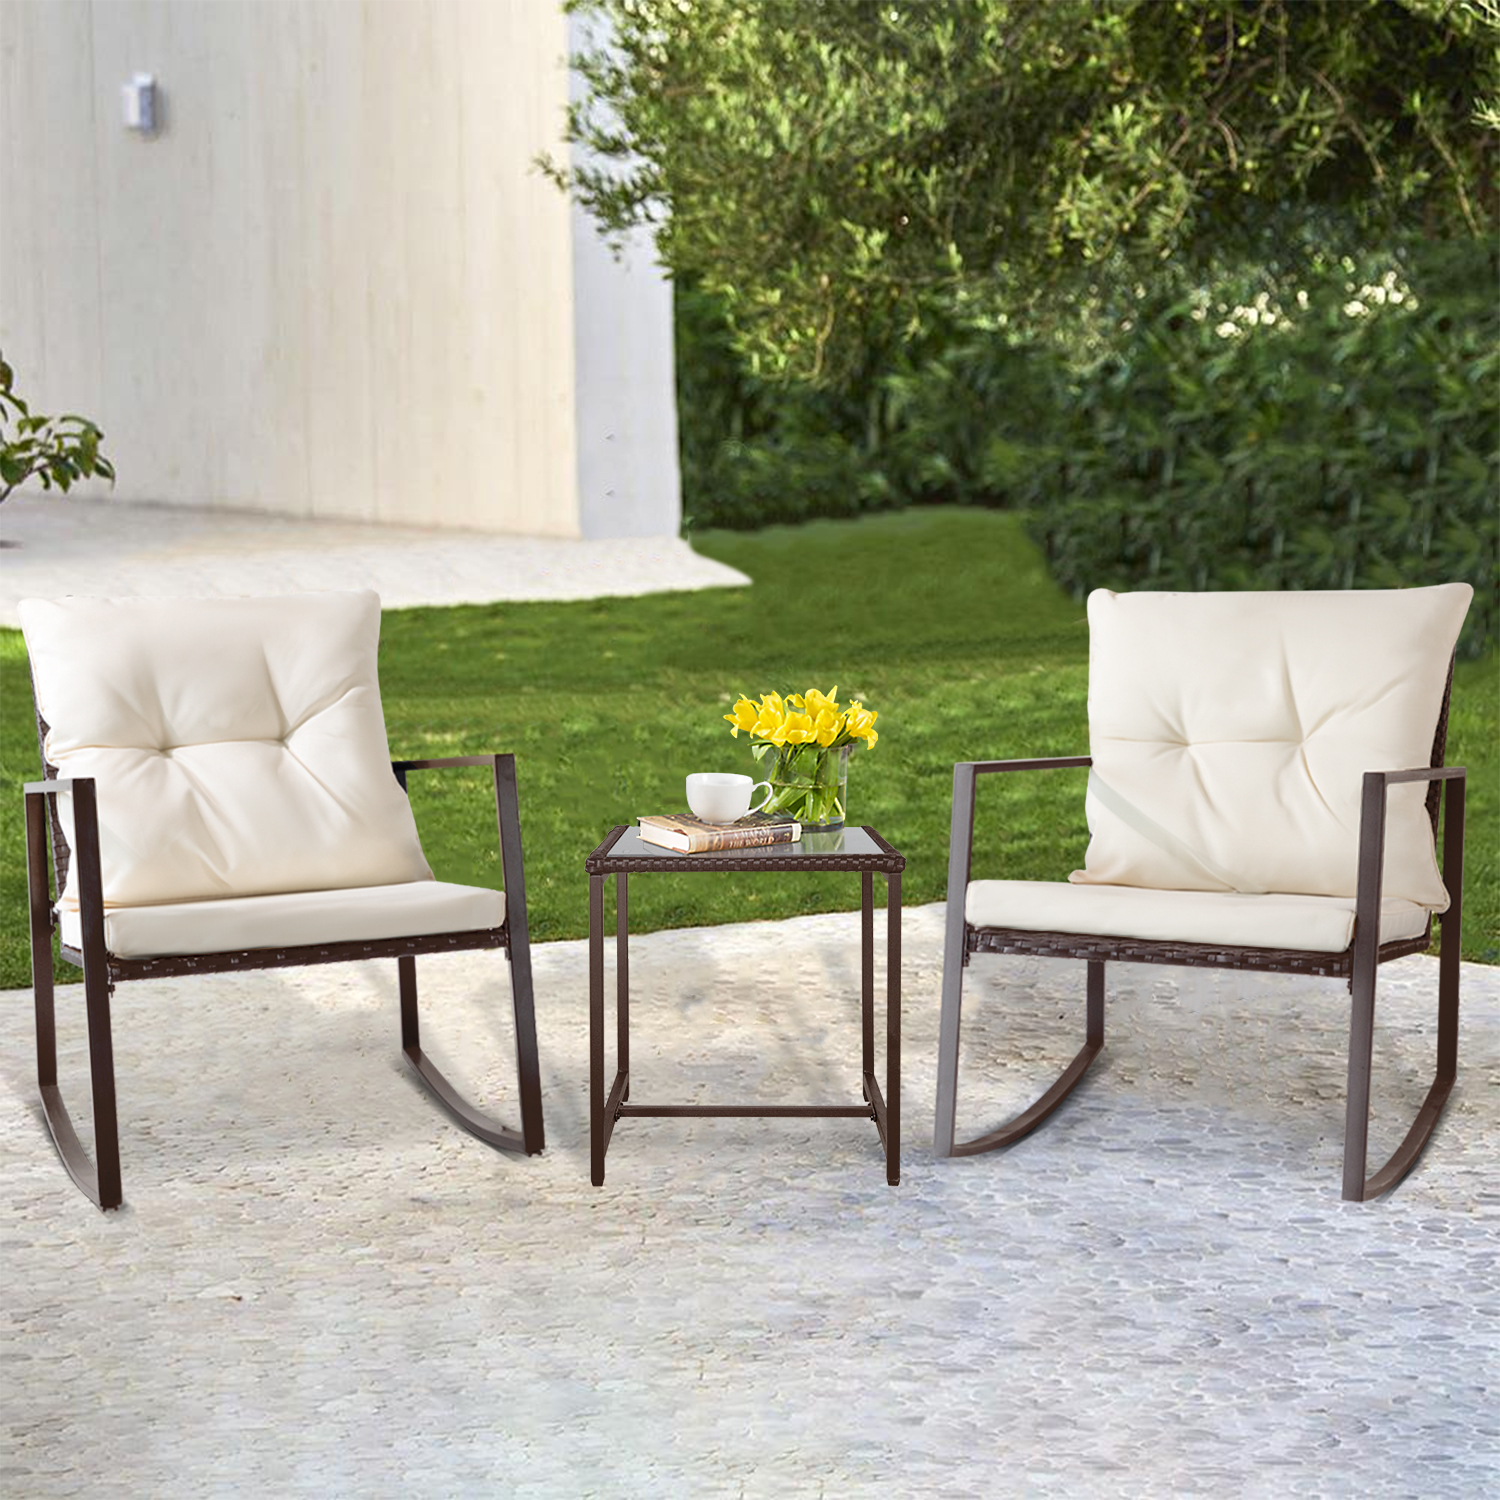 SUNCROWN 3-Piece Outdoor Patio Furniture Sets Brown Wicker Bistro Rocking Chairs and Table Set - Beige - image 1 of 6